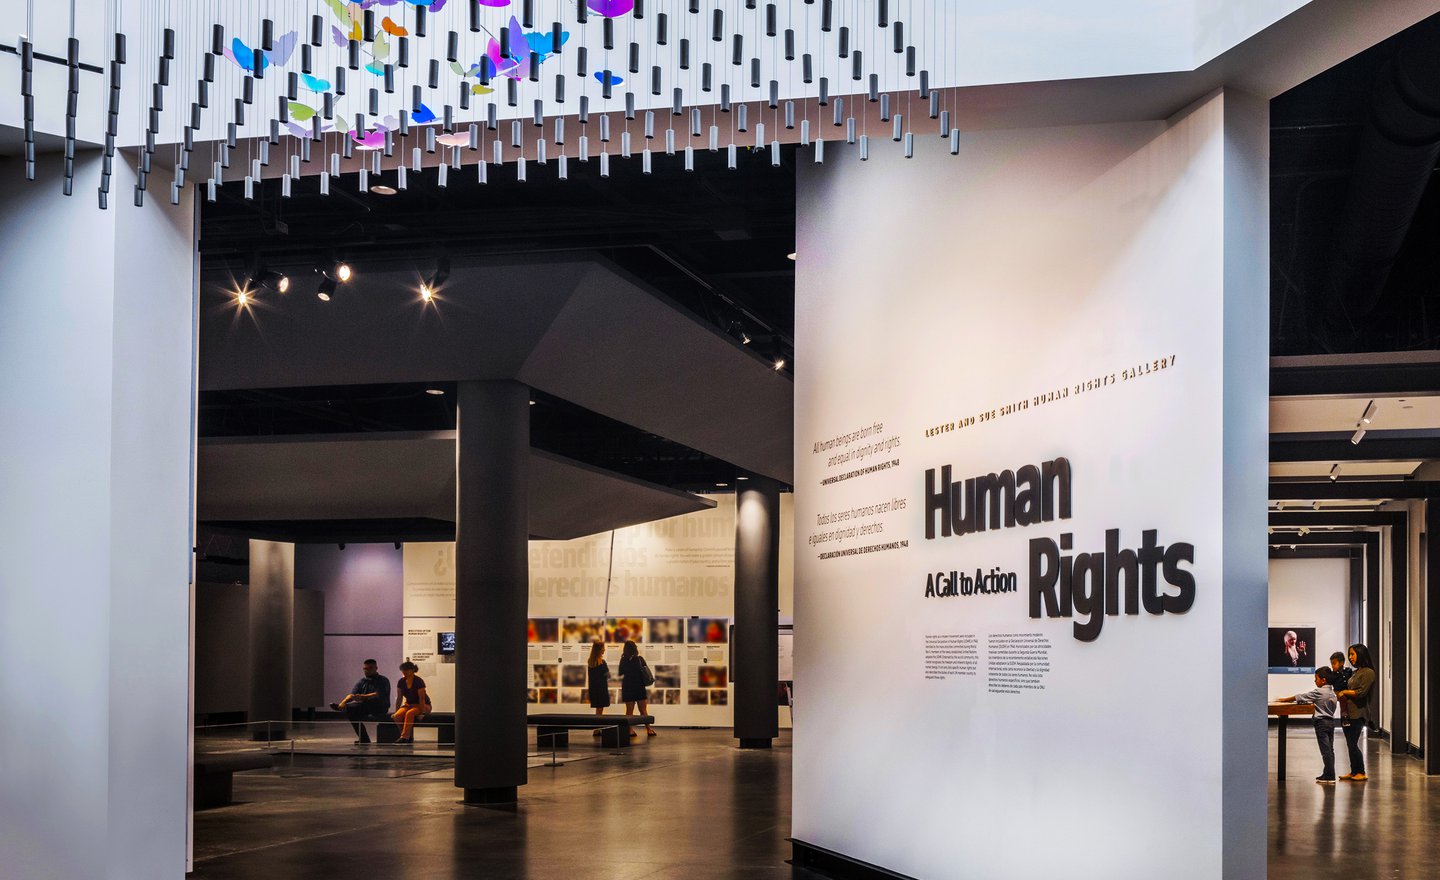 human rights gallery recovered.jpg 1440x880 q85 crop subsampling 2 upscale